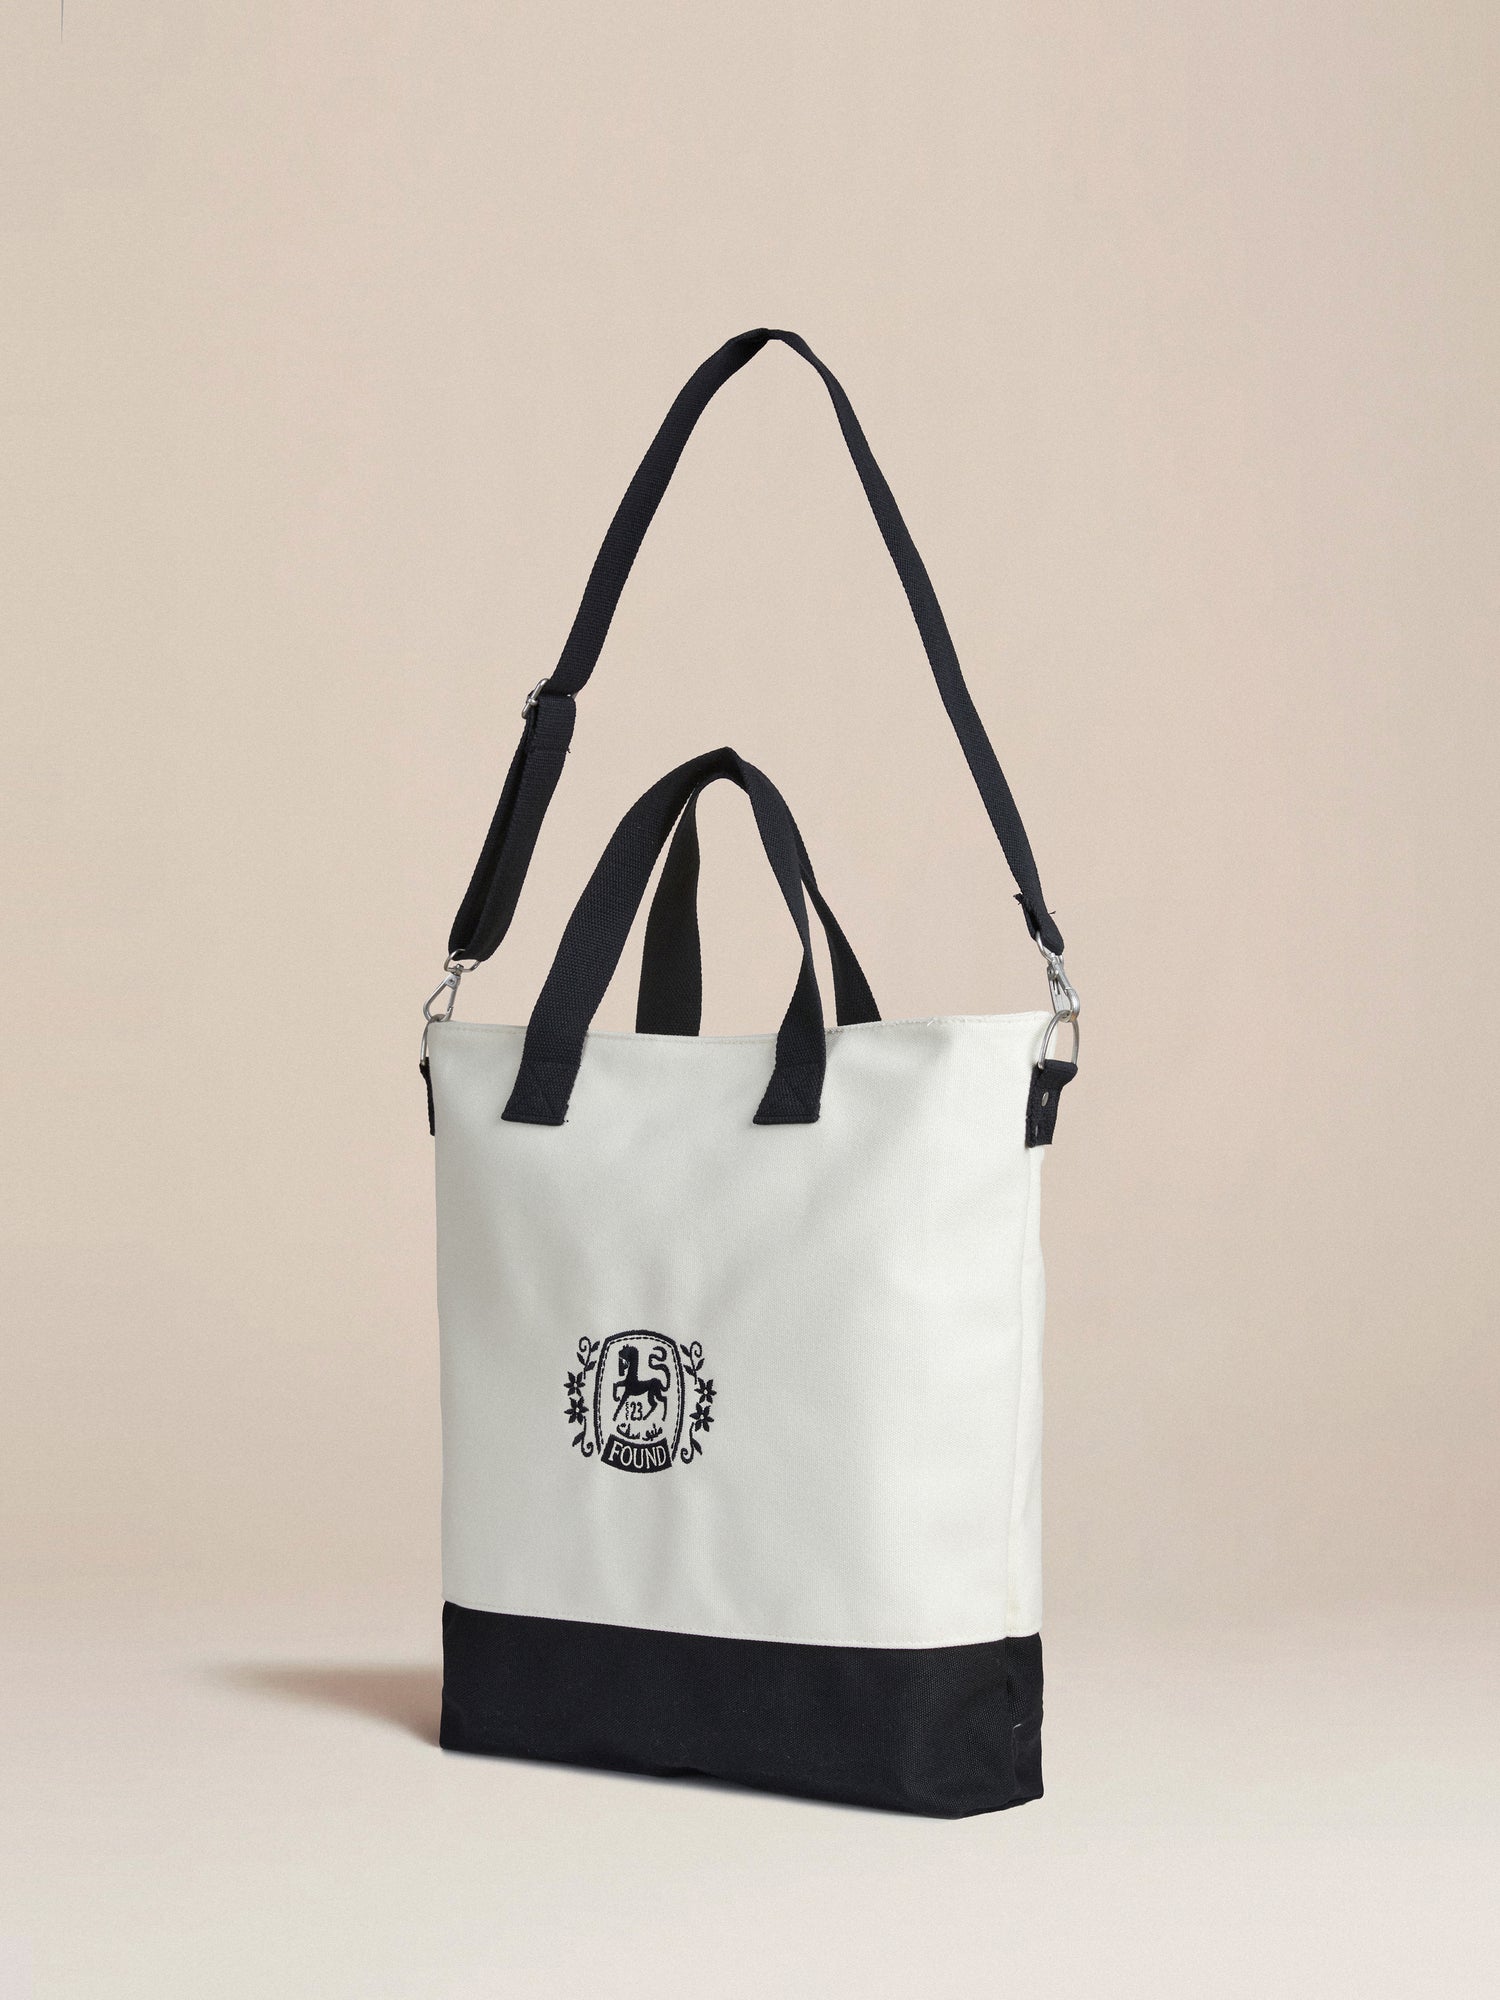 A black and white Horse Logo Crest Canvas Bag with a distinctive logo crest on it by Profound.